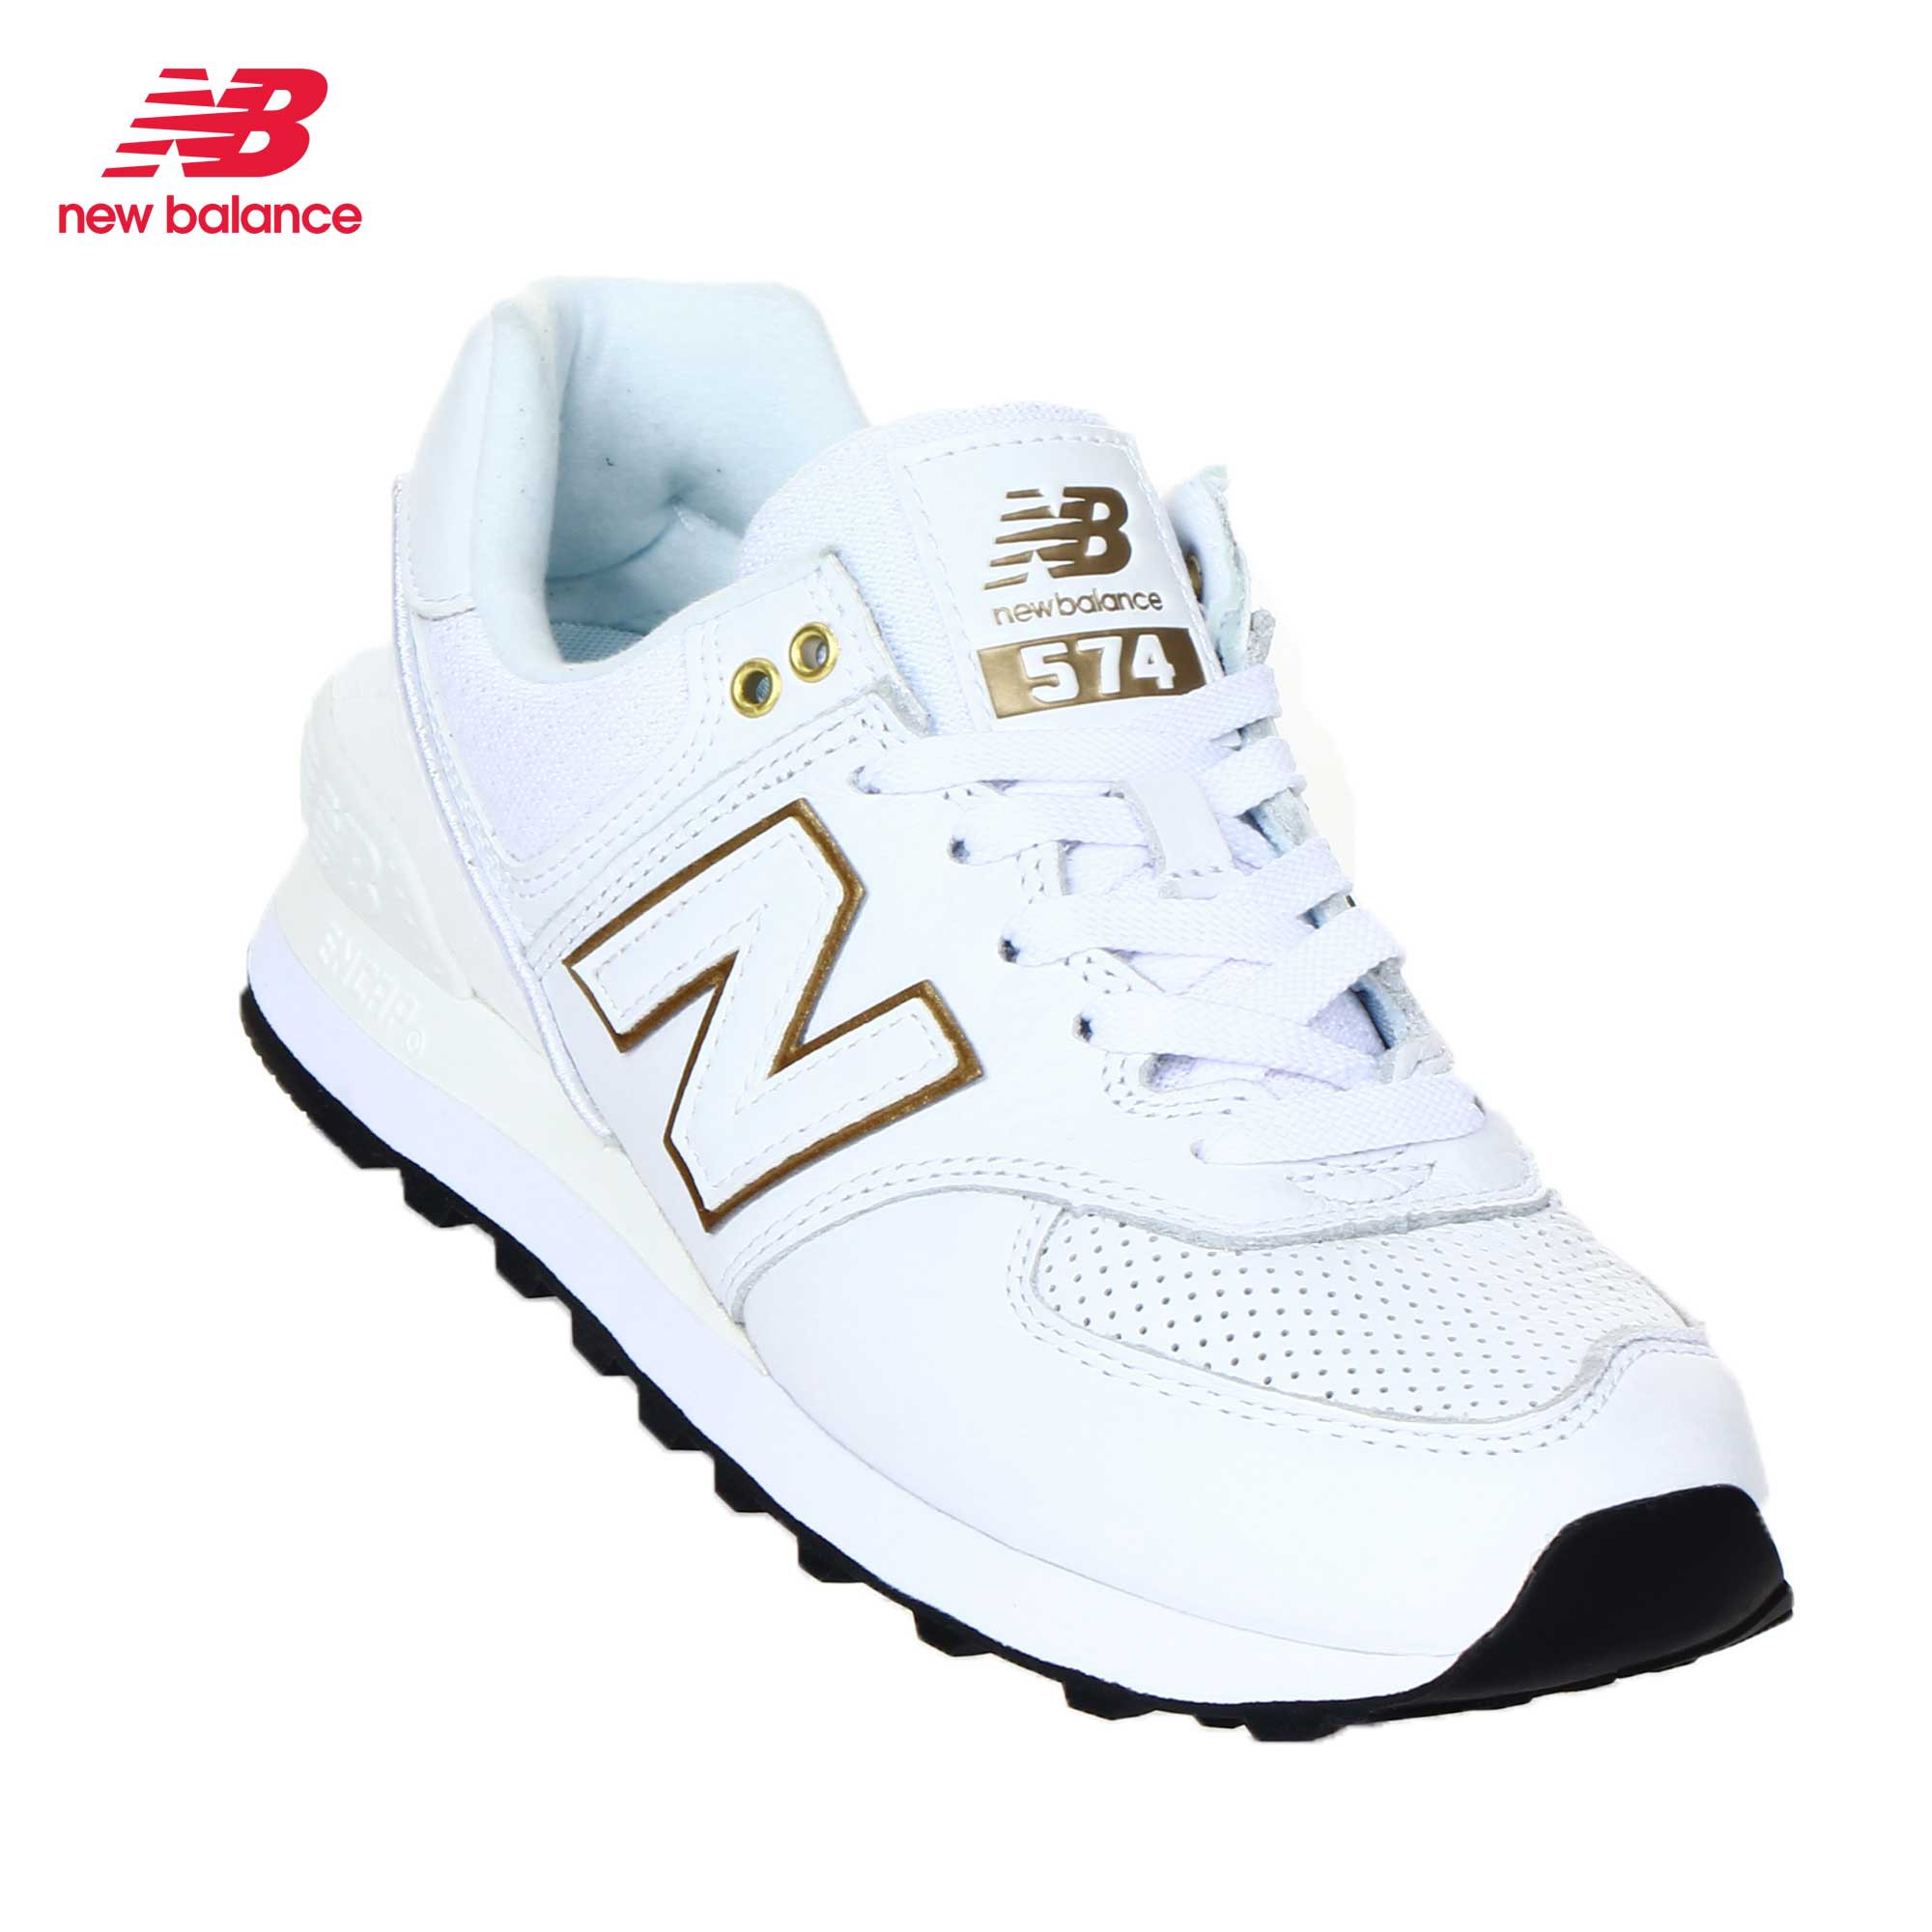 new balance shoes for women ph